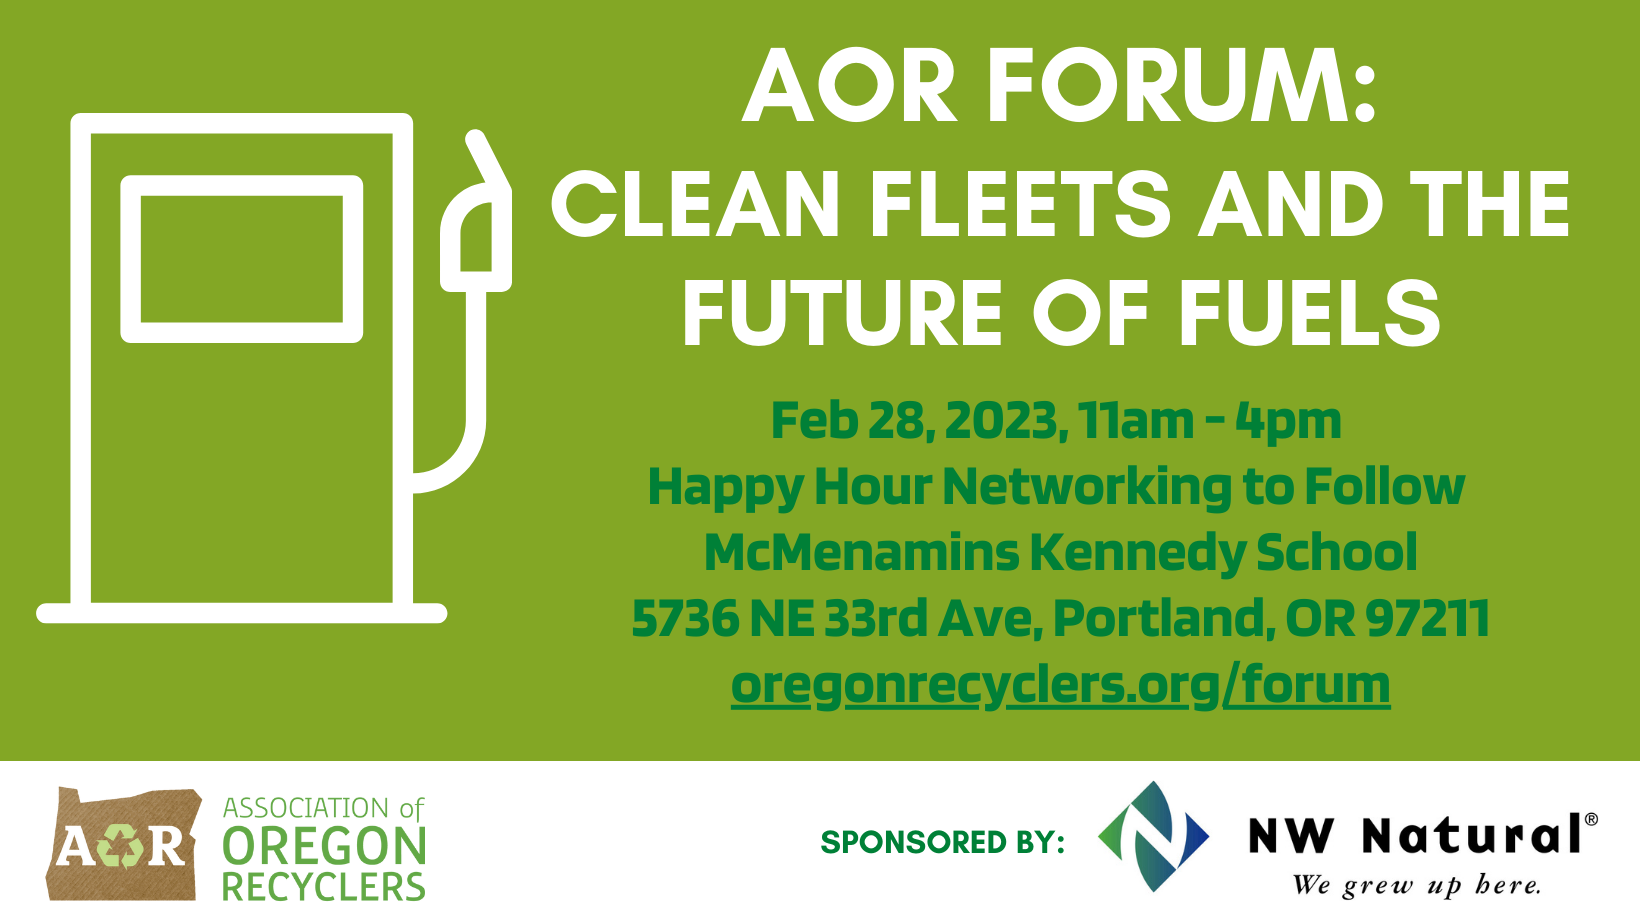 AOR Forum: Clean Fleets and the Future of Fuels